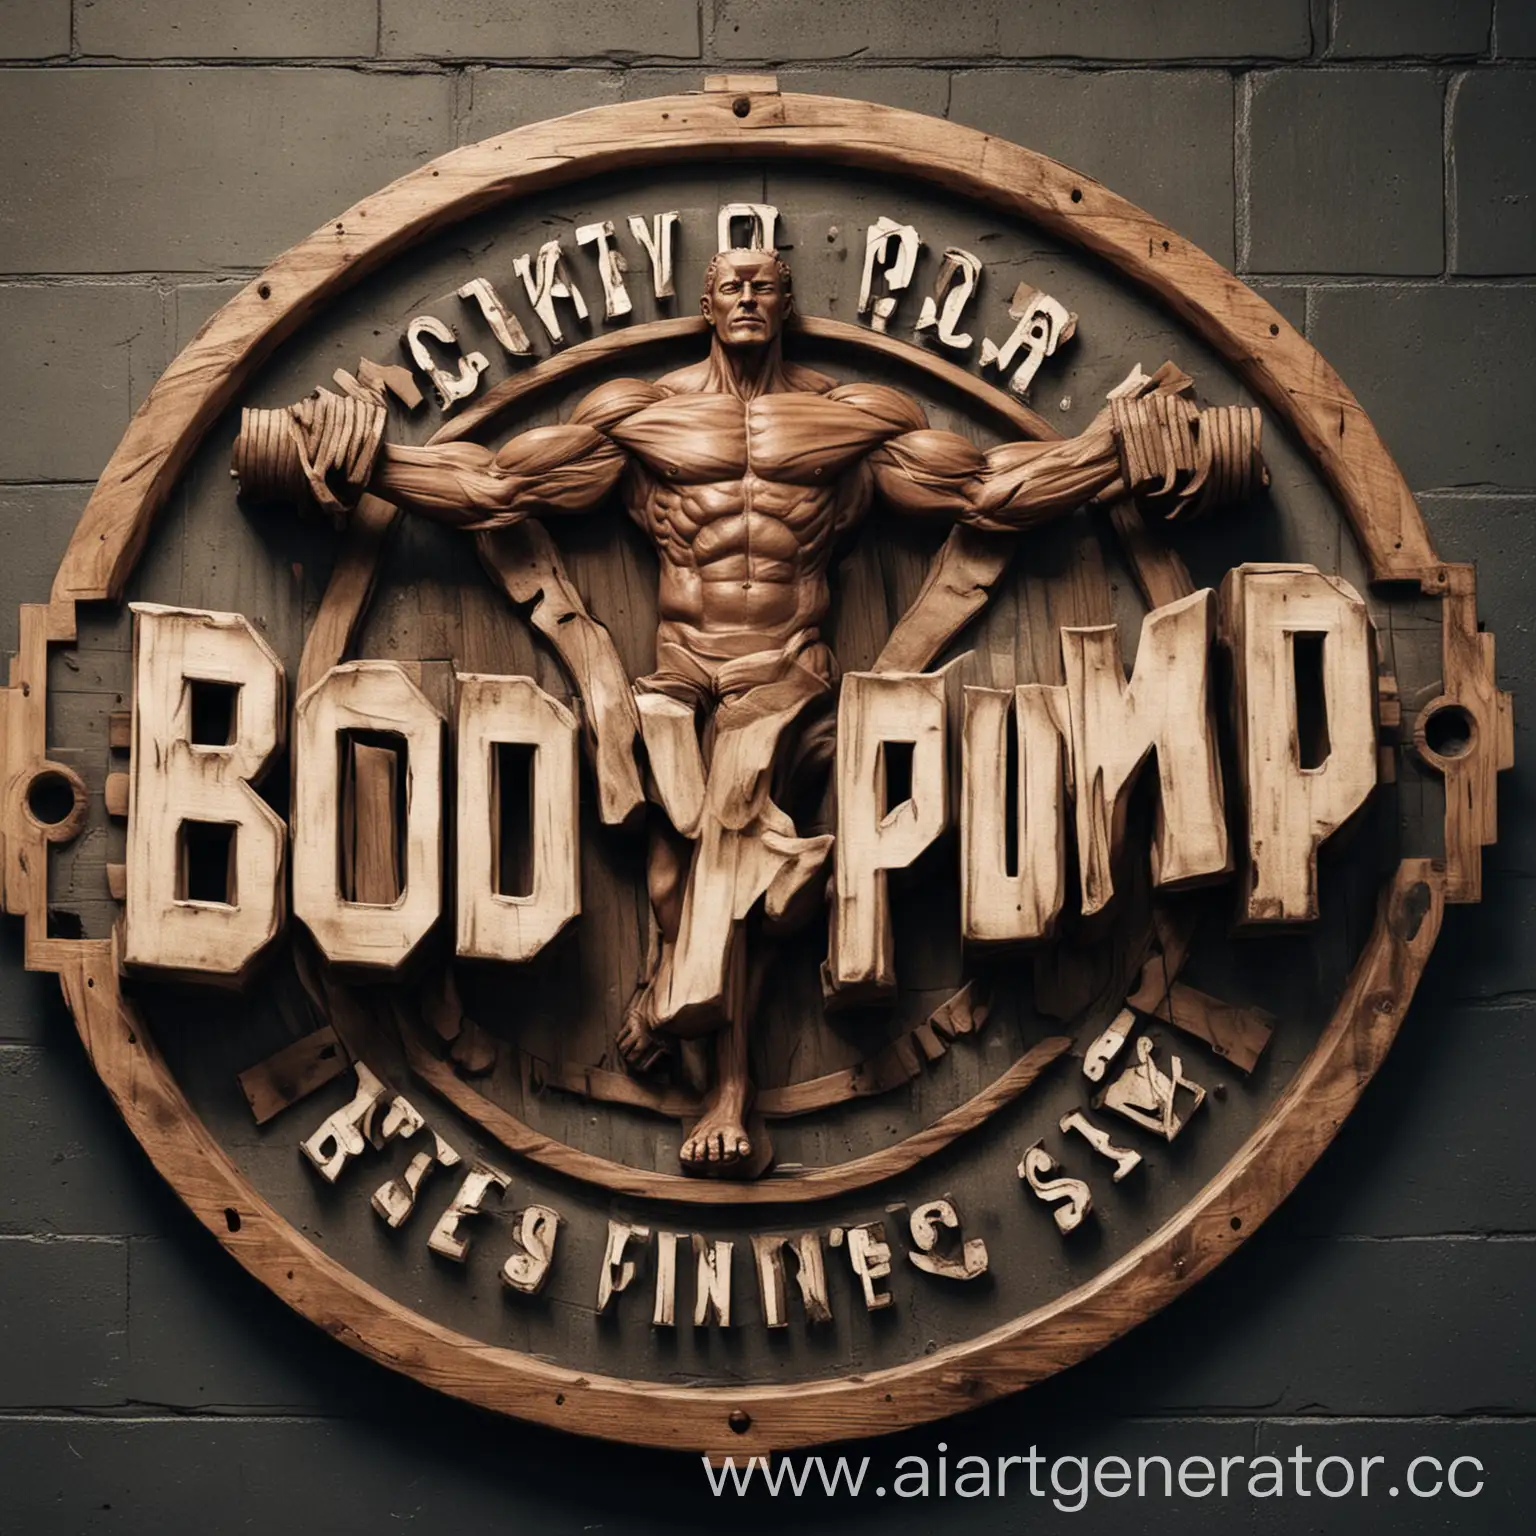 NeoTraditional-Body-Pump-Fitness-Club-Sign-Muscular-Letters-Display-Strength-and-Vitality